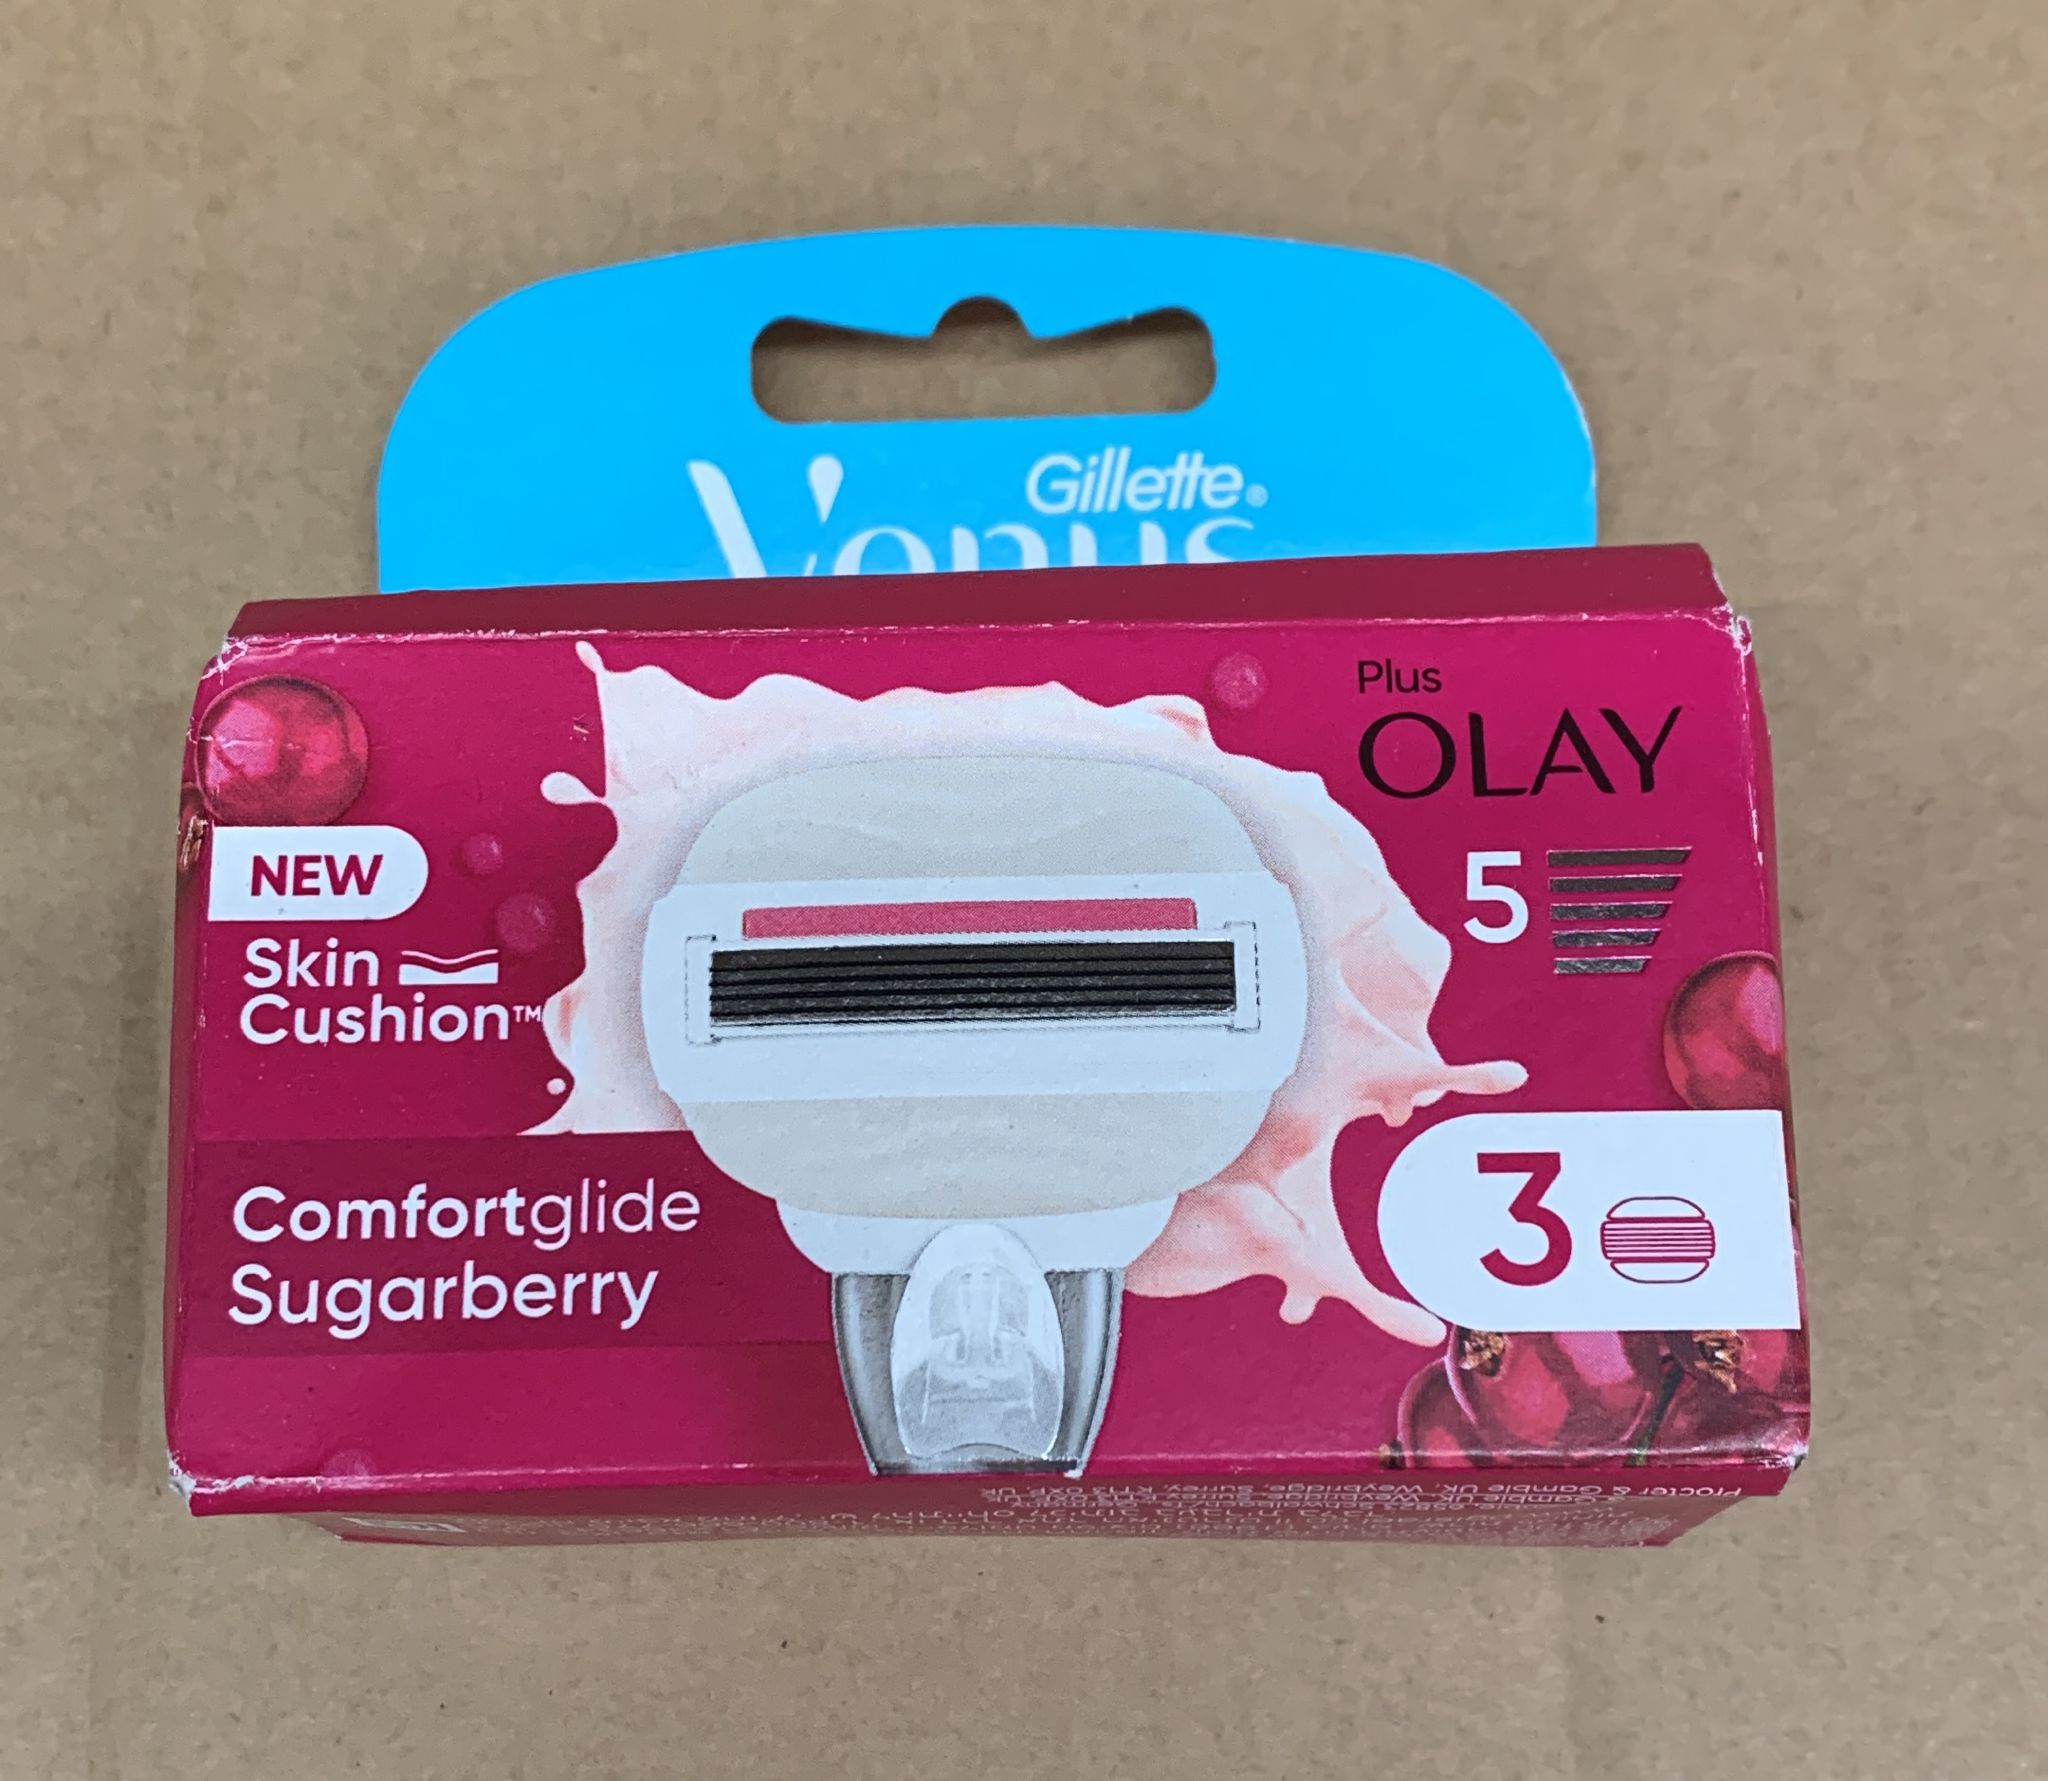 Gillette Venus ComfortGlide Sugarberry with Olay Razor Blades Women, Pack of 3 2-In-1 Razor Blade Refills, Lubrastrip with A Touch of Vitamin E 5807